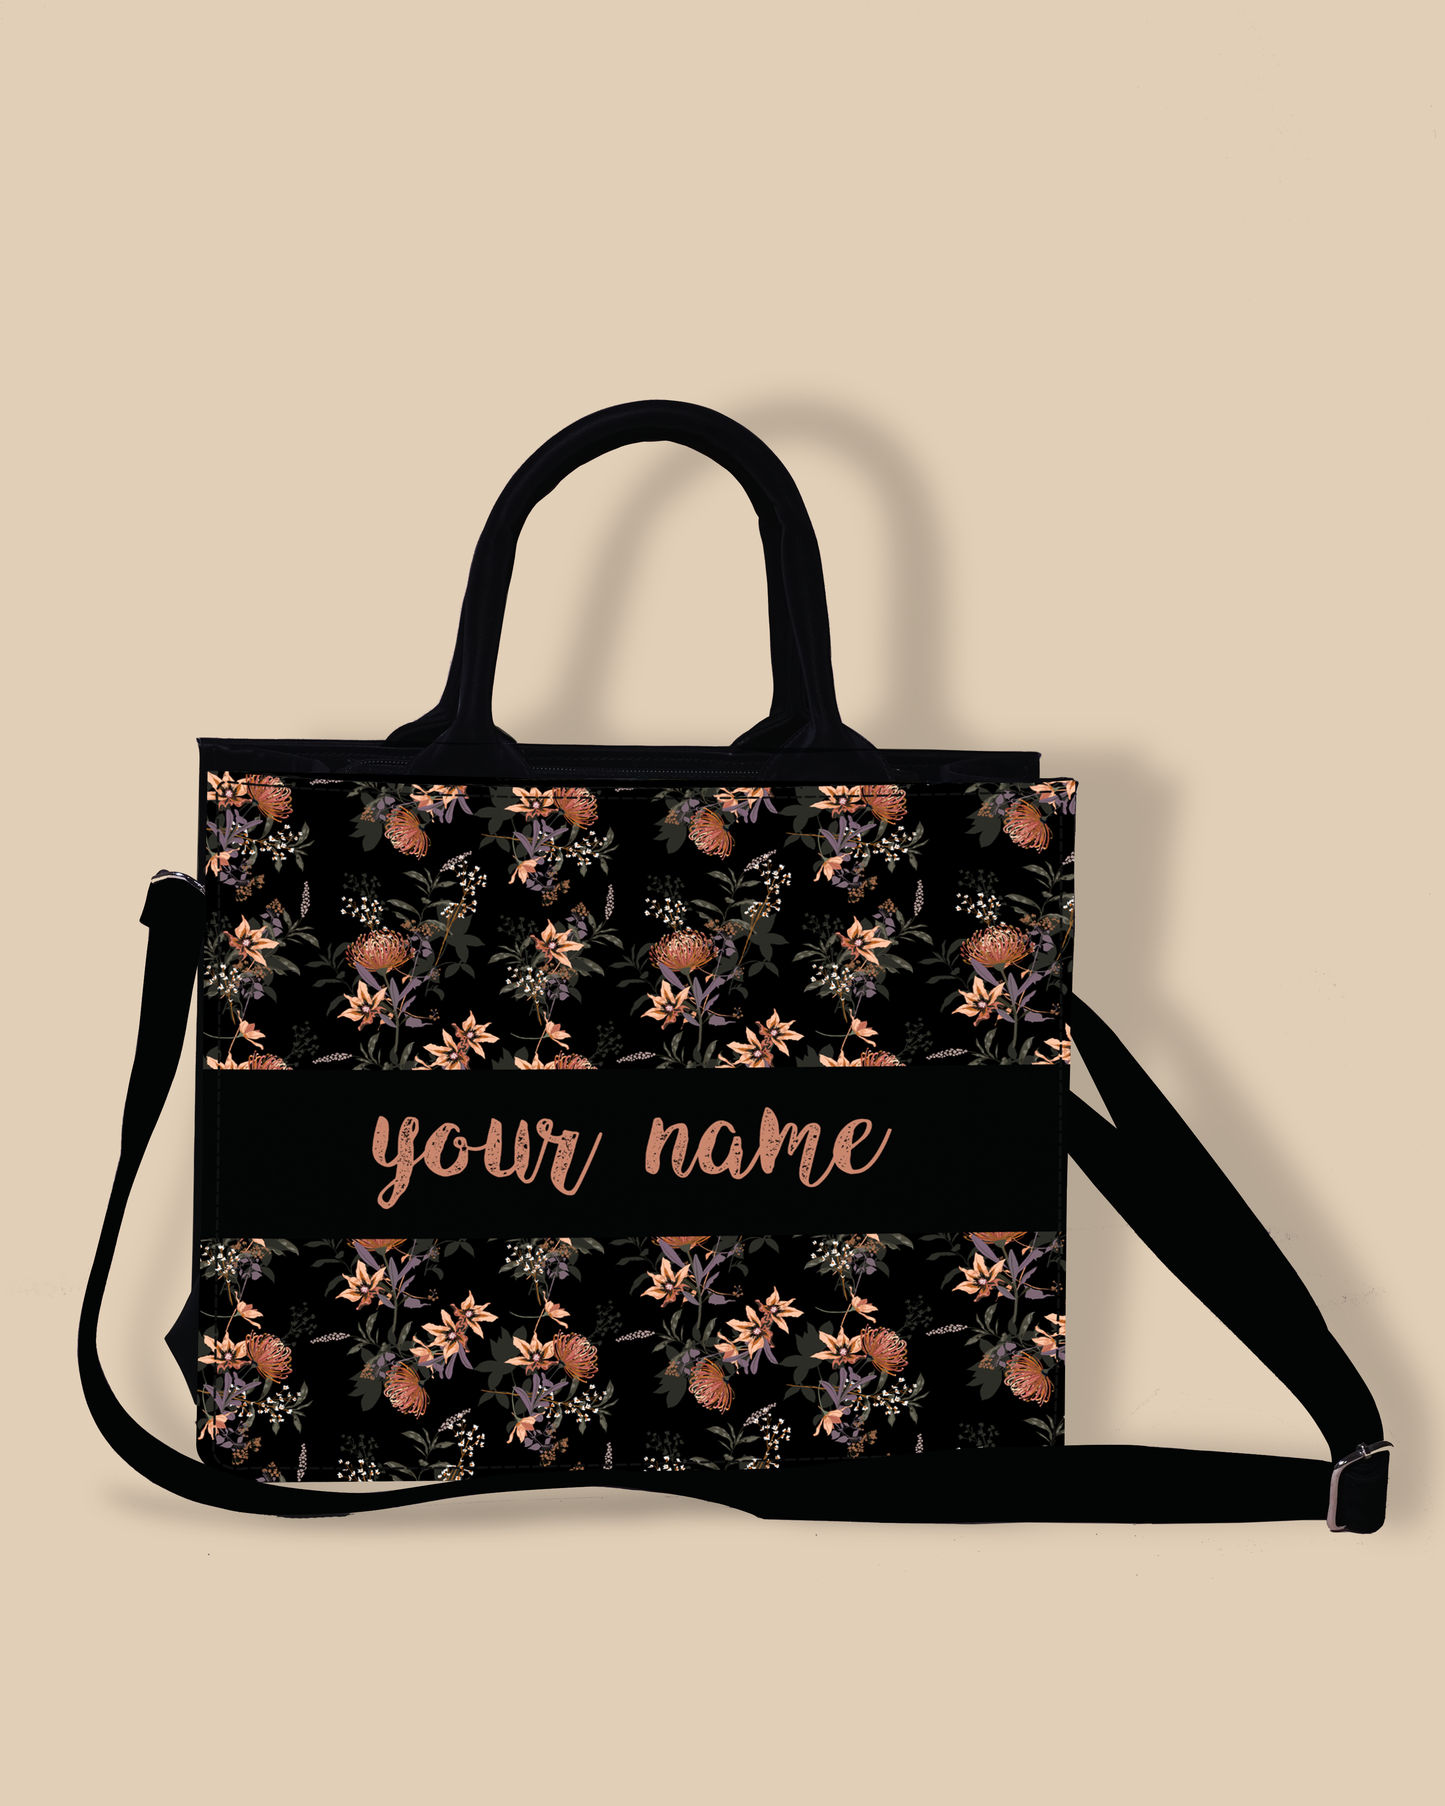 Customized small Tote Bag Designed with Decorative Blooming Flower Plant Patter